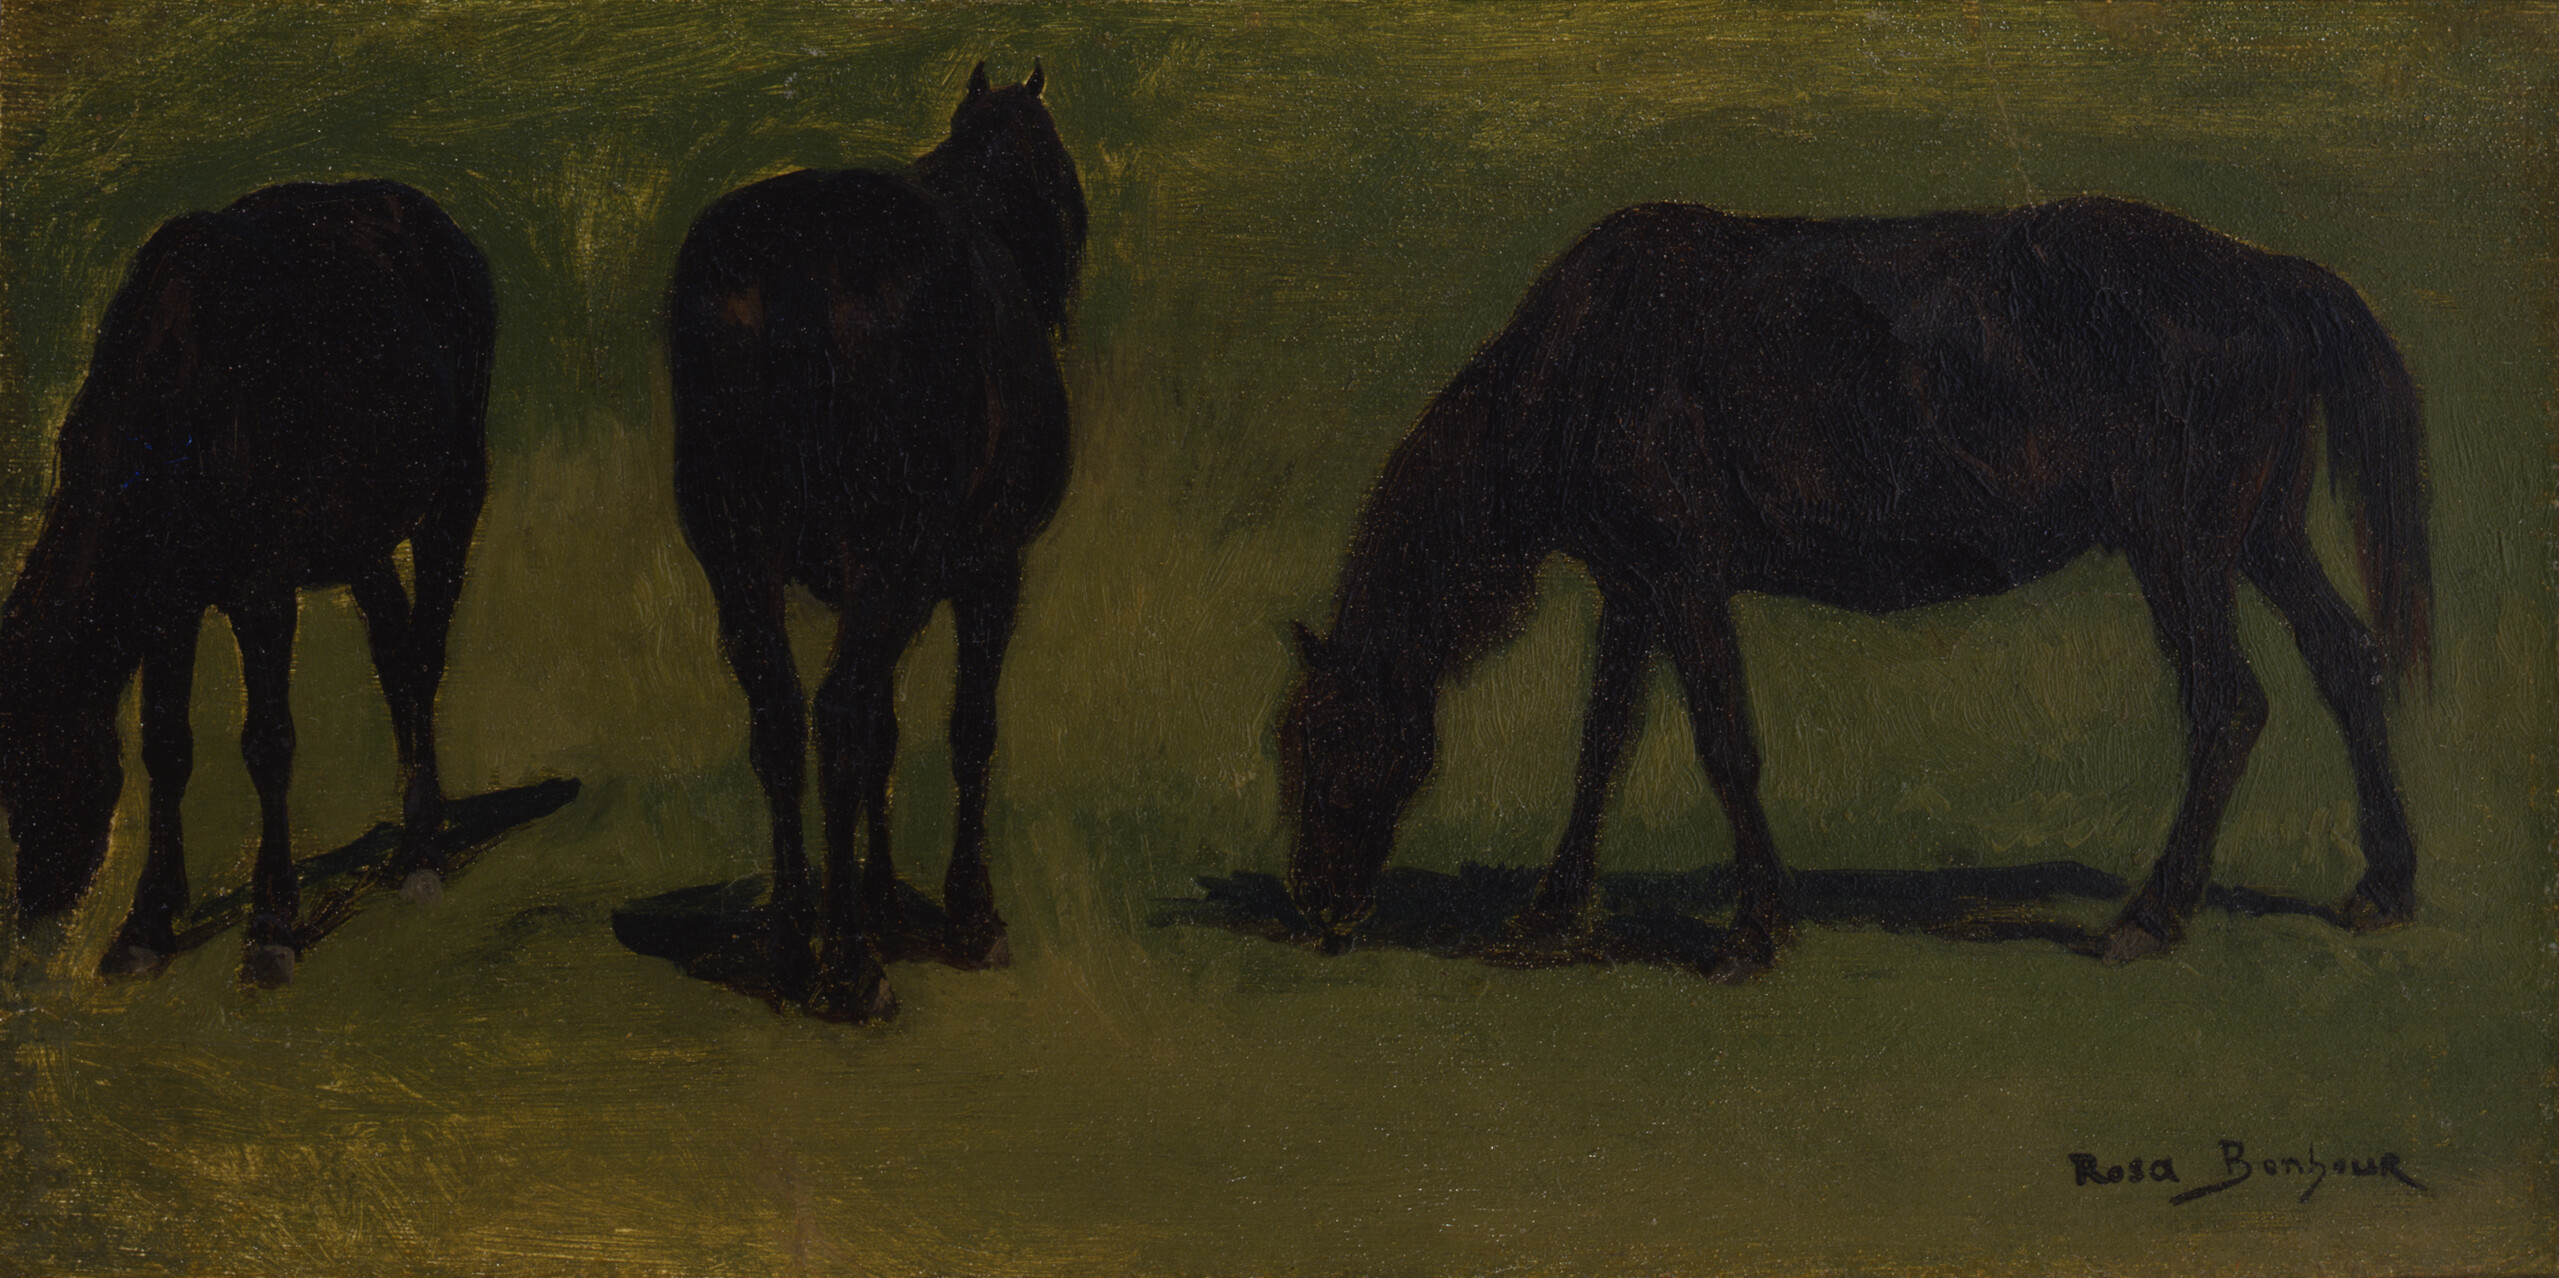 Three horses are grazing on the prairie. Their dark hair and their shadows on the ground stand in stark contrast to the lush green grass they are standing on.